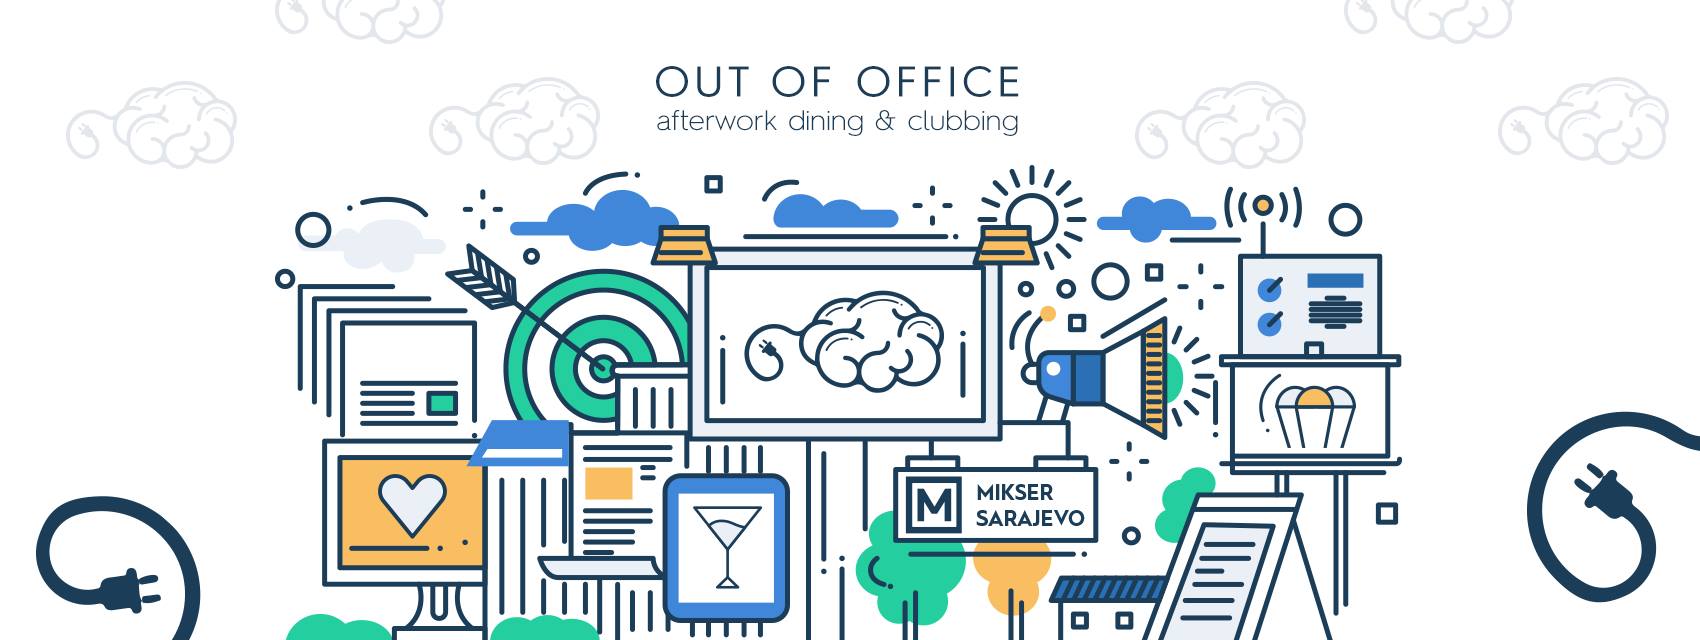 Out Of Office – Afterwork Dining & Clubbing 27.10.2017. Mikser